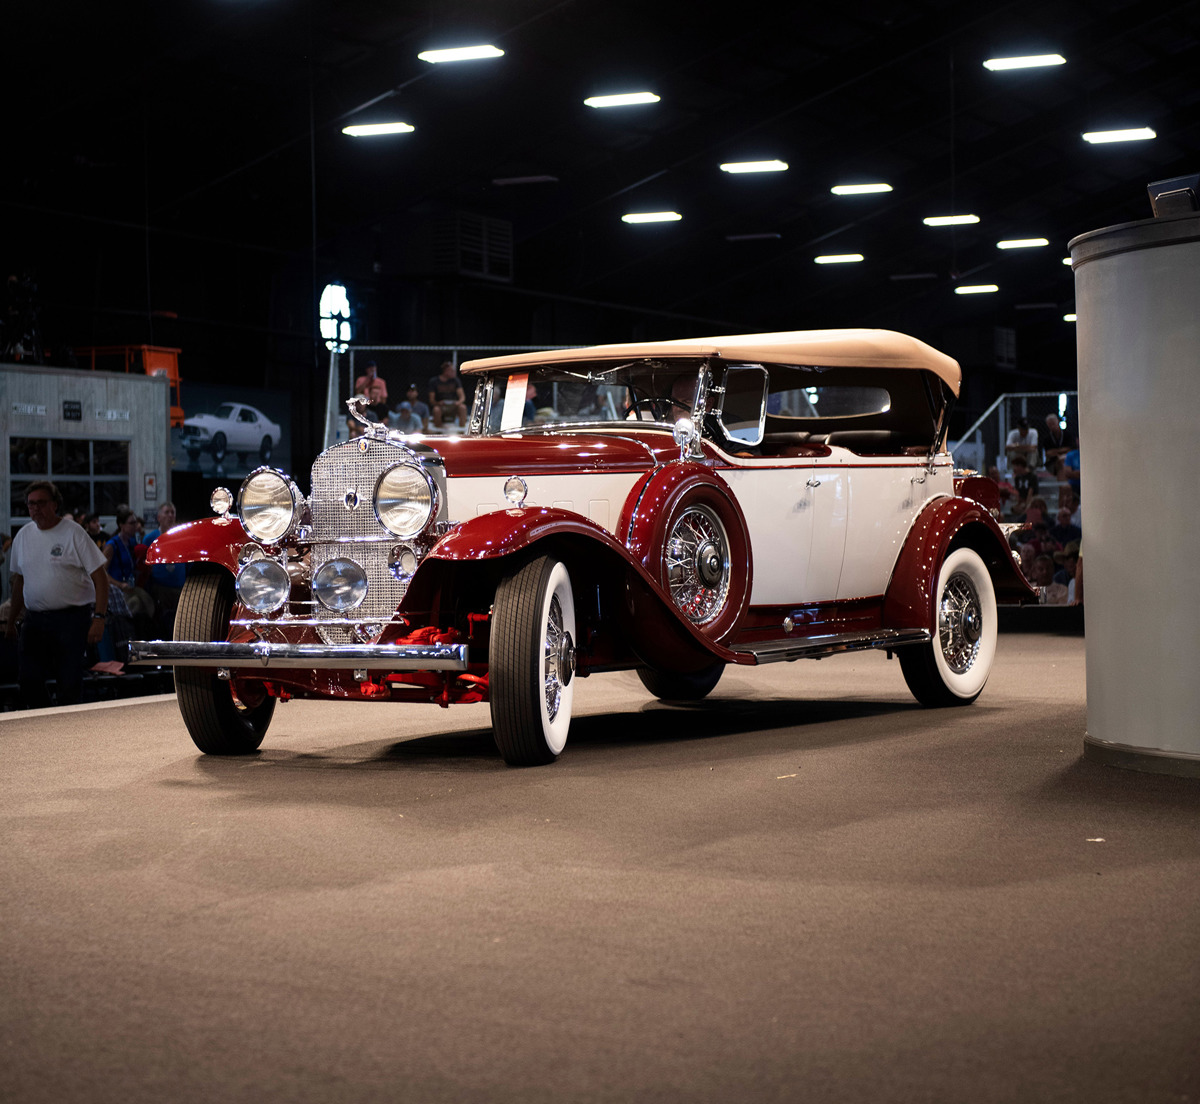 1931 Cadillac V-12 Phaeton by Fleetwood offered at RM Sotheby’s Auburn Fall live auction 2019